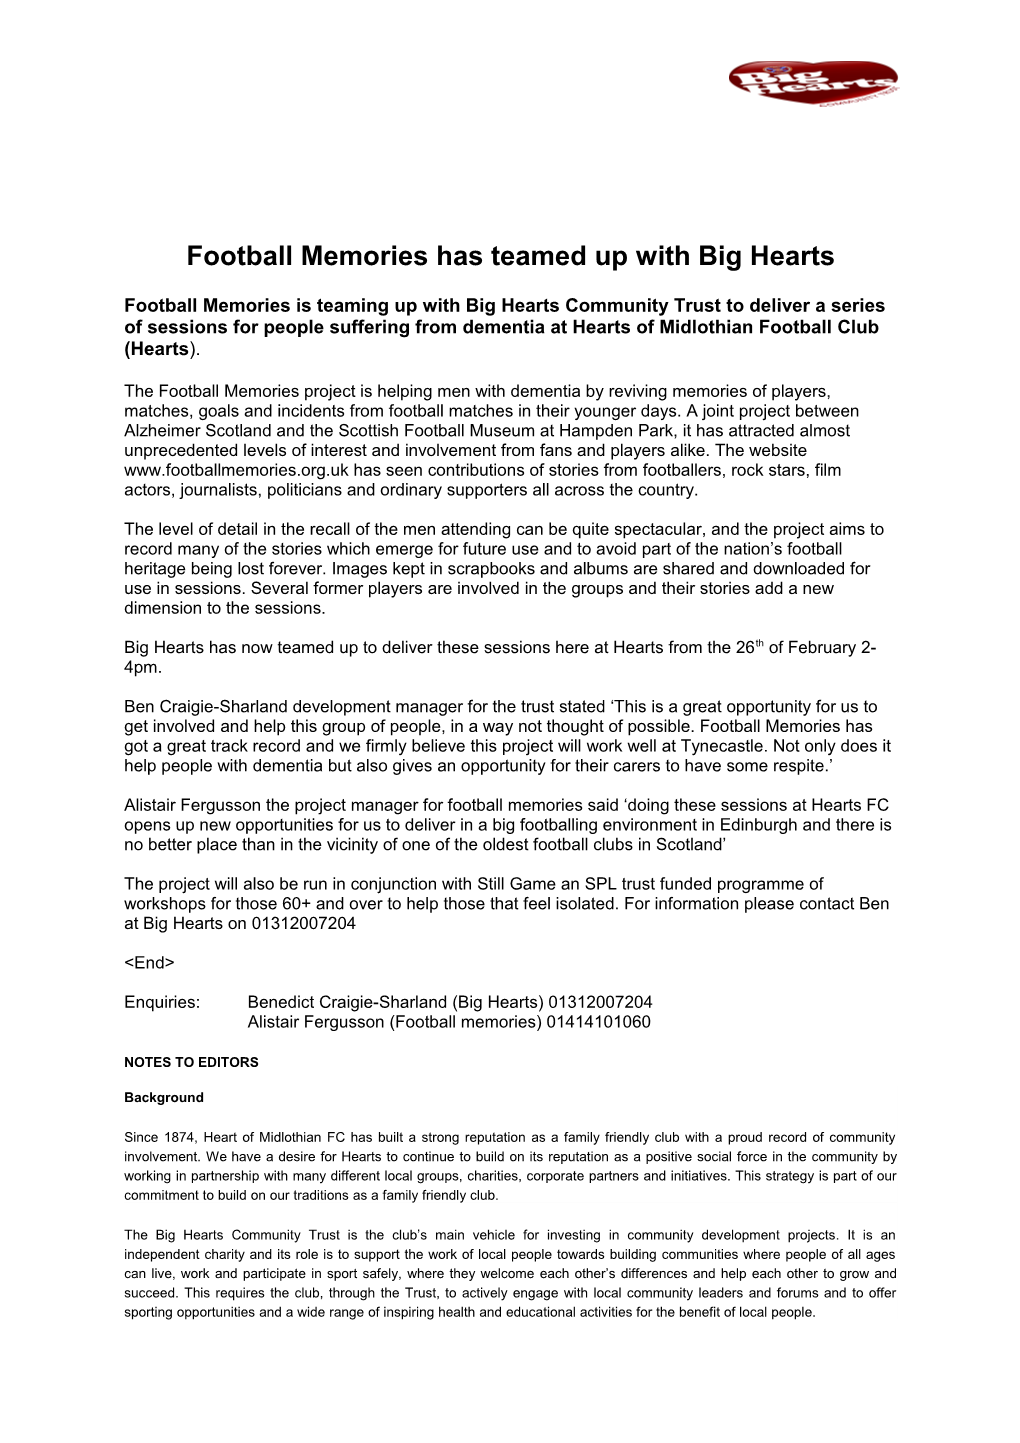 Football Memories Has Teamed up with Big Hearts